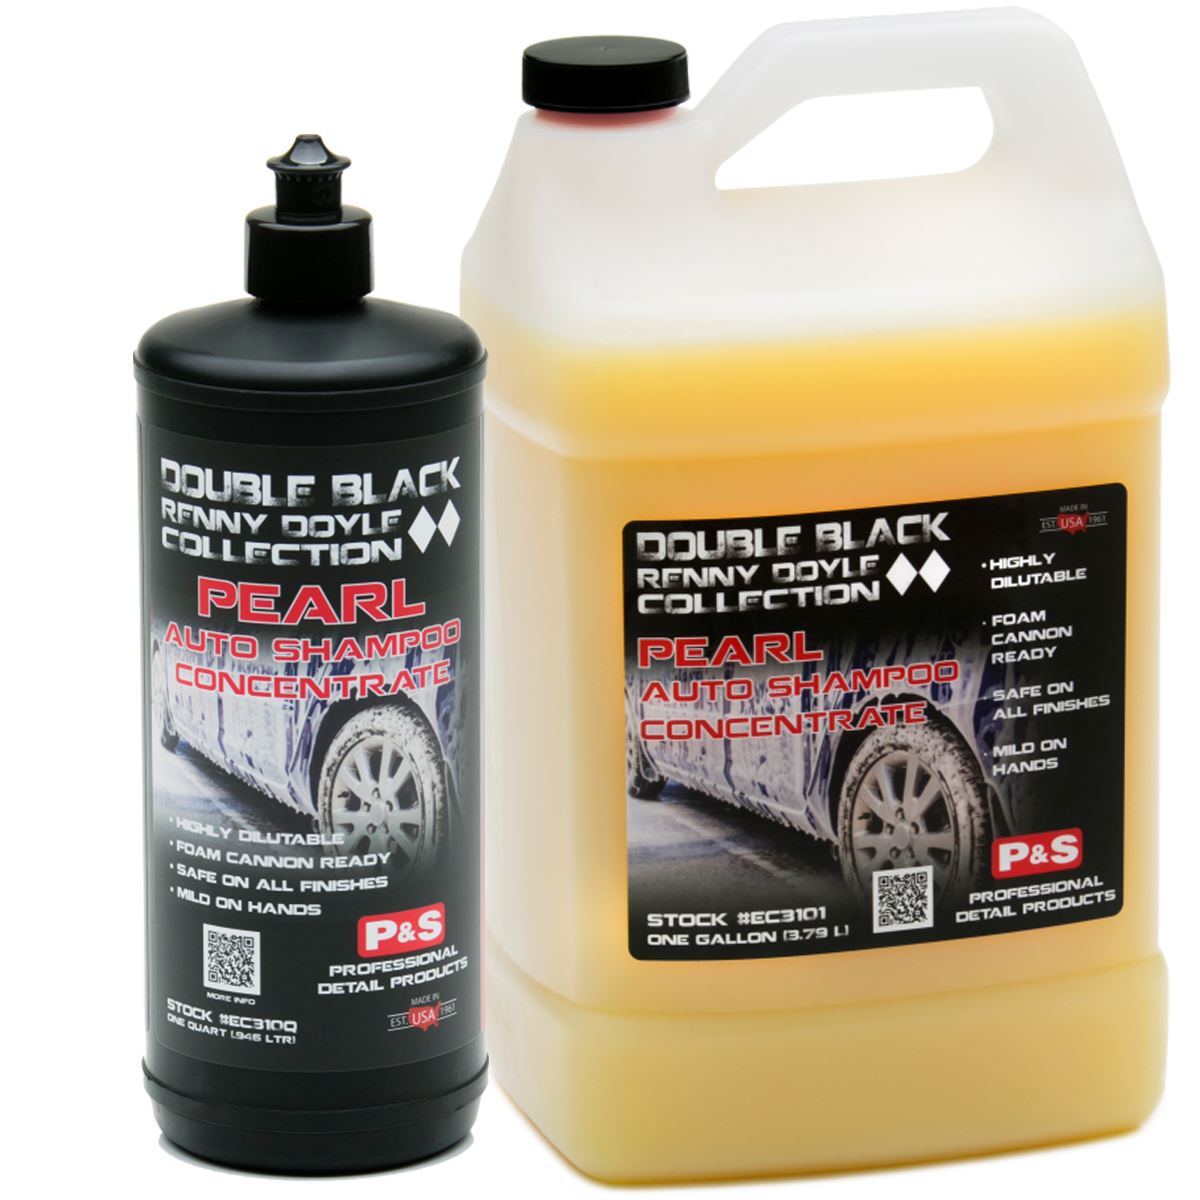 Pearl Auto Shampoo EC31. Professional Detailing Products, Because Car is a Reflection of You